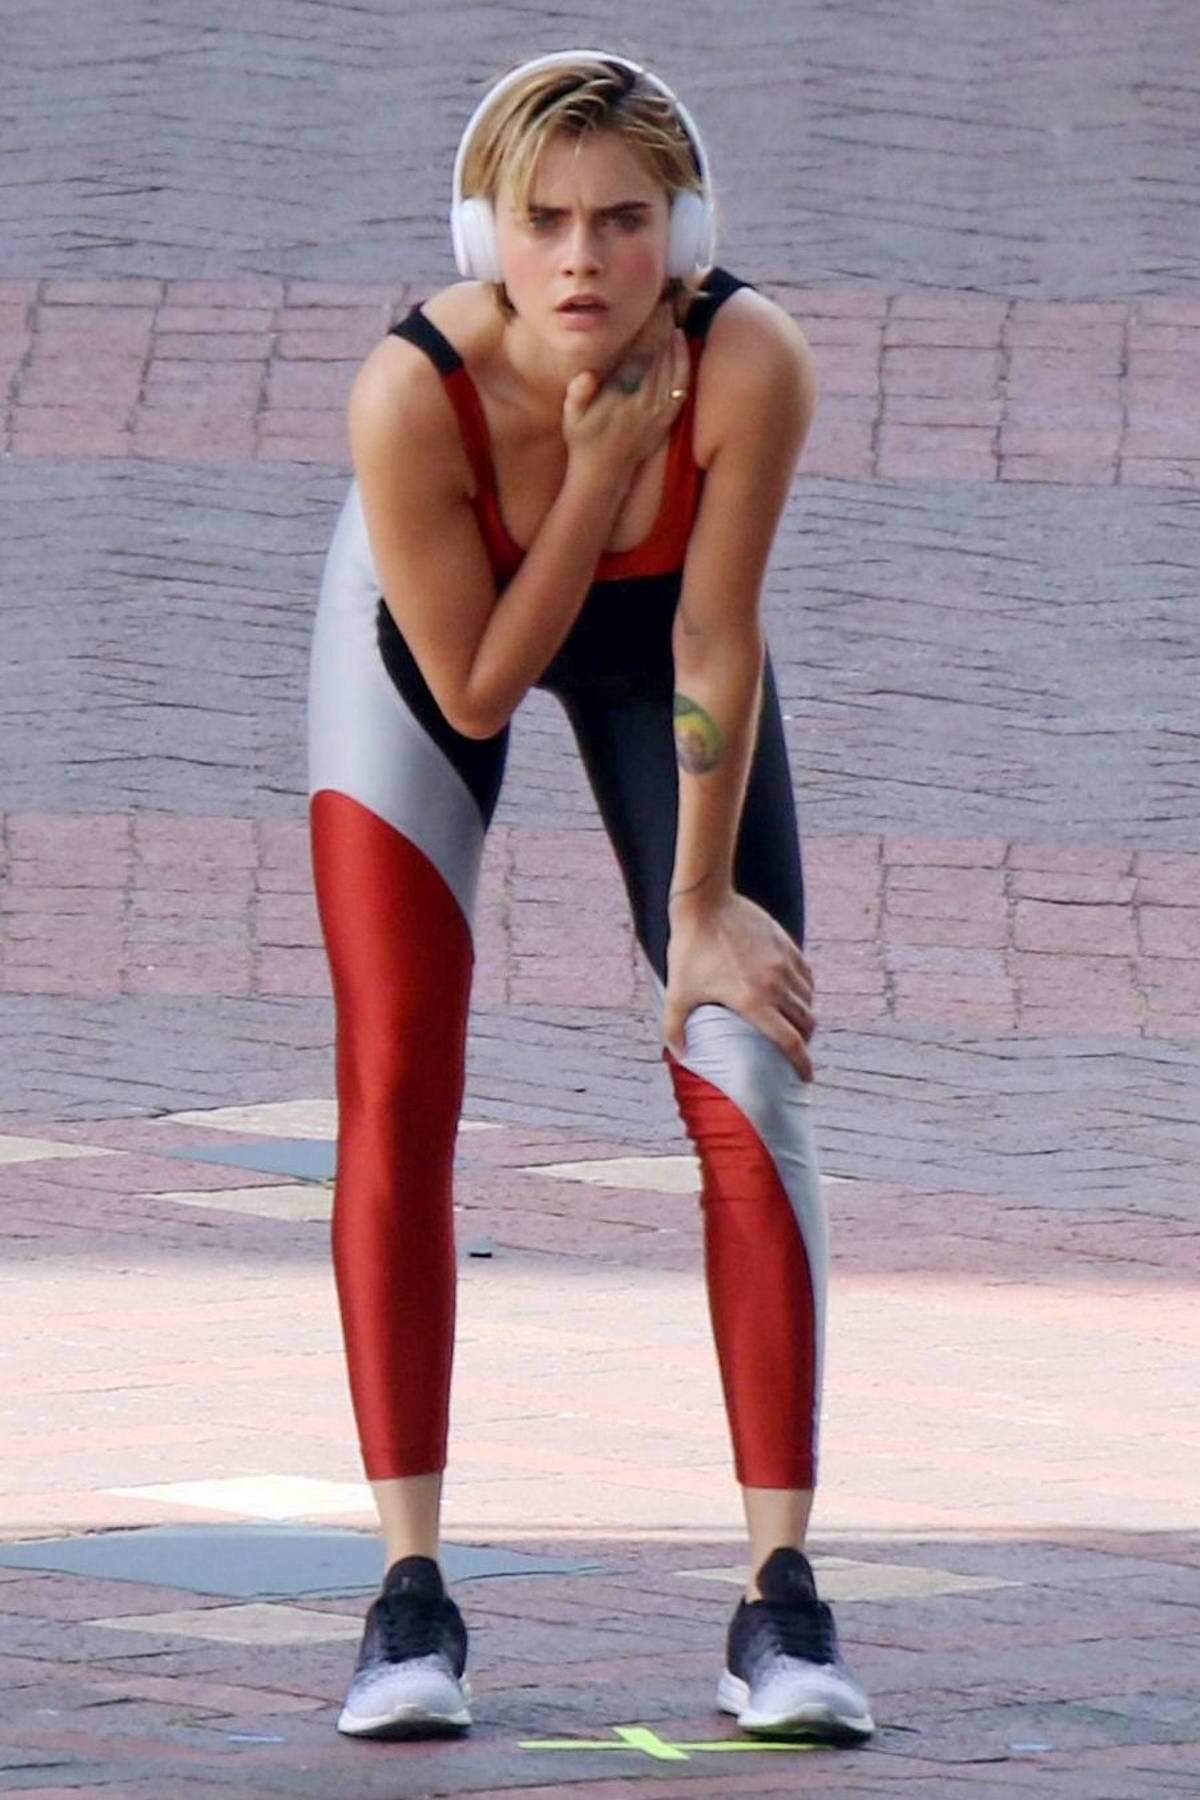 cara delevingne sports multi-colored activewear while filming a